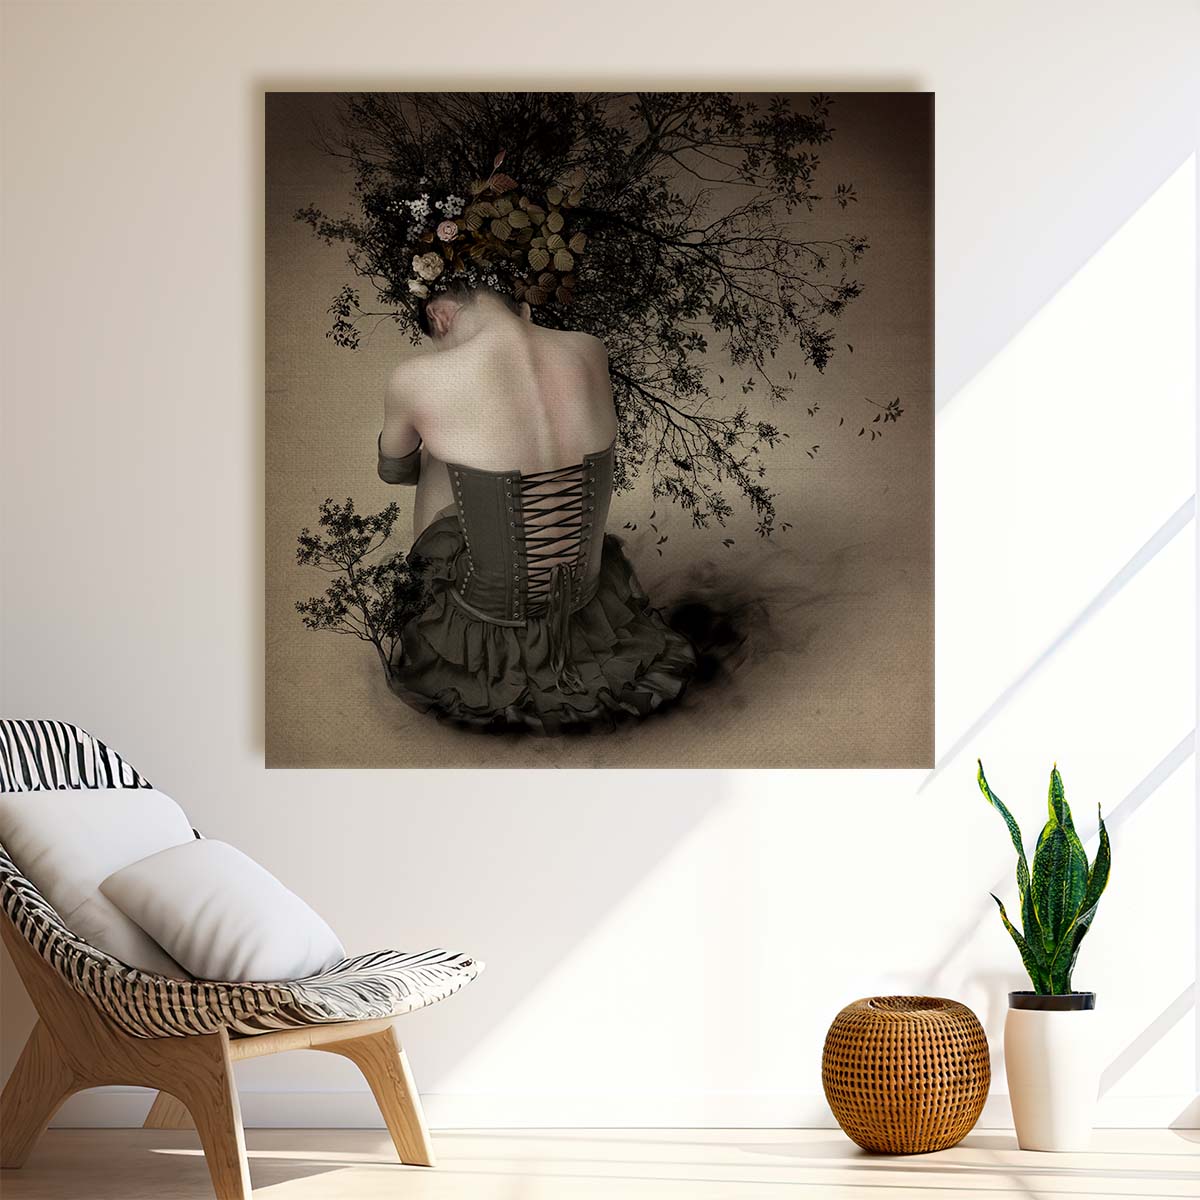 Enigmatic Woman in Blossom A Surreal Floral Fantasy Wall Art by Luxuriance Designs. Made in USA.